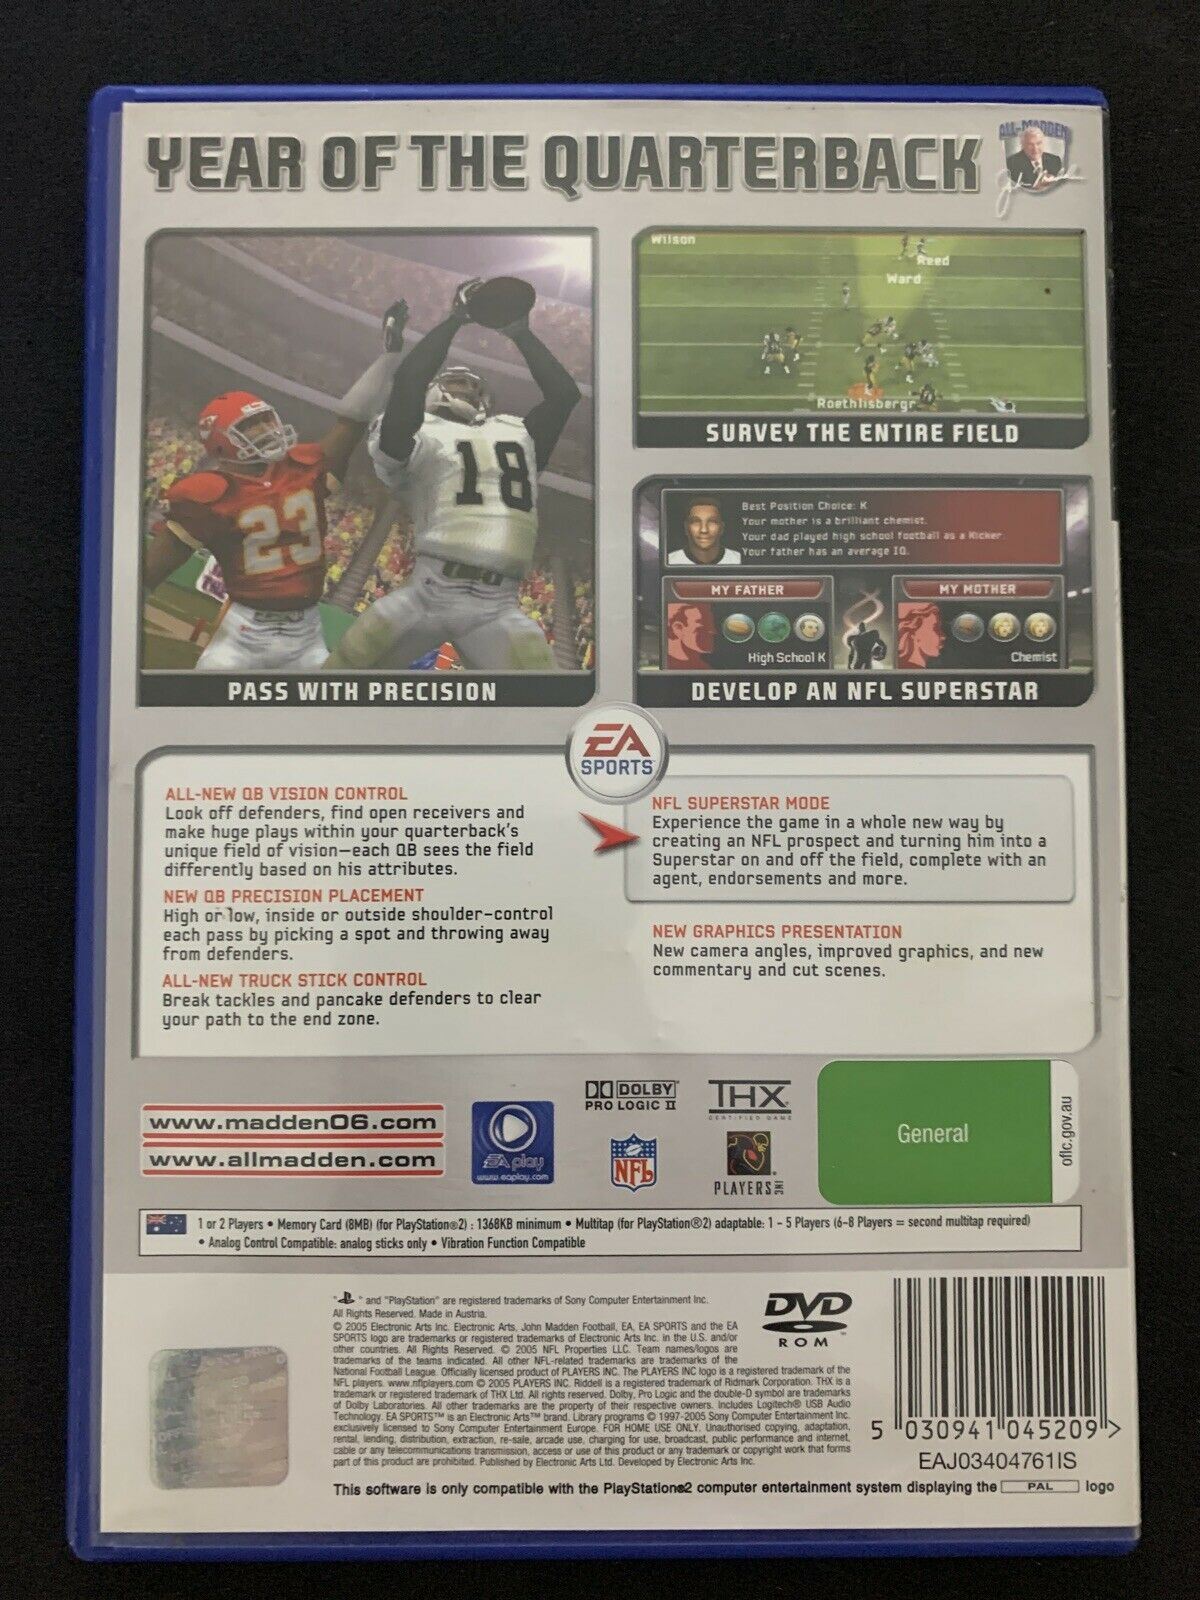 Madden NFL 06 - Sony Playstation 2 PS2 PAL Game with Manual